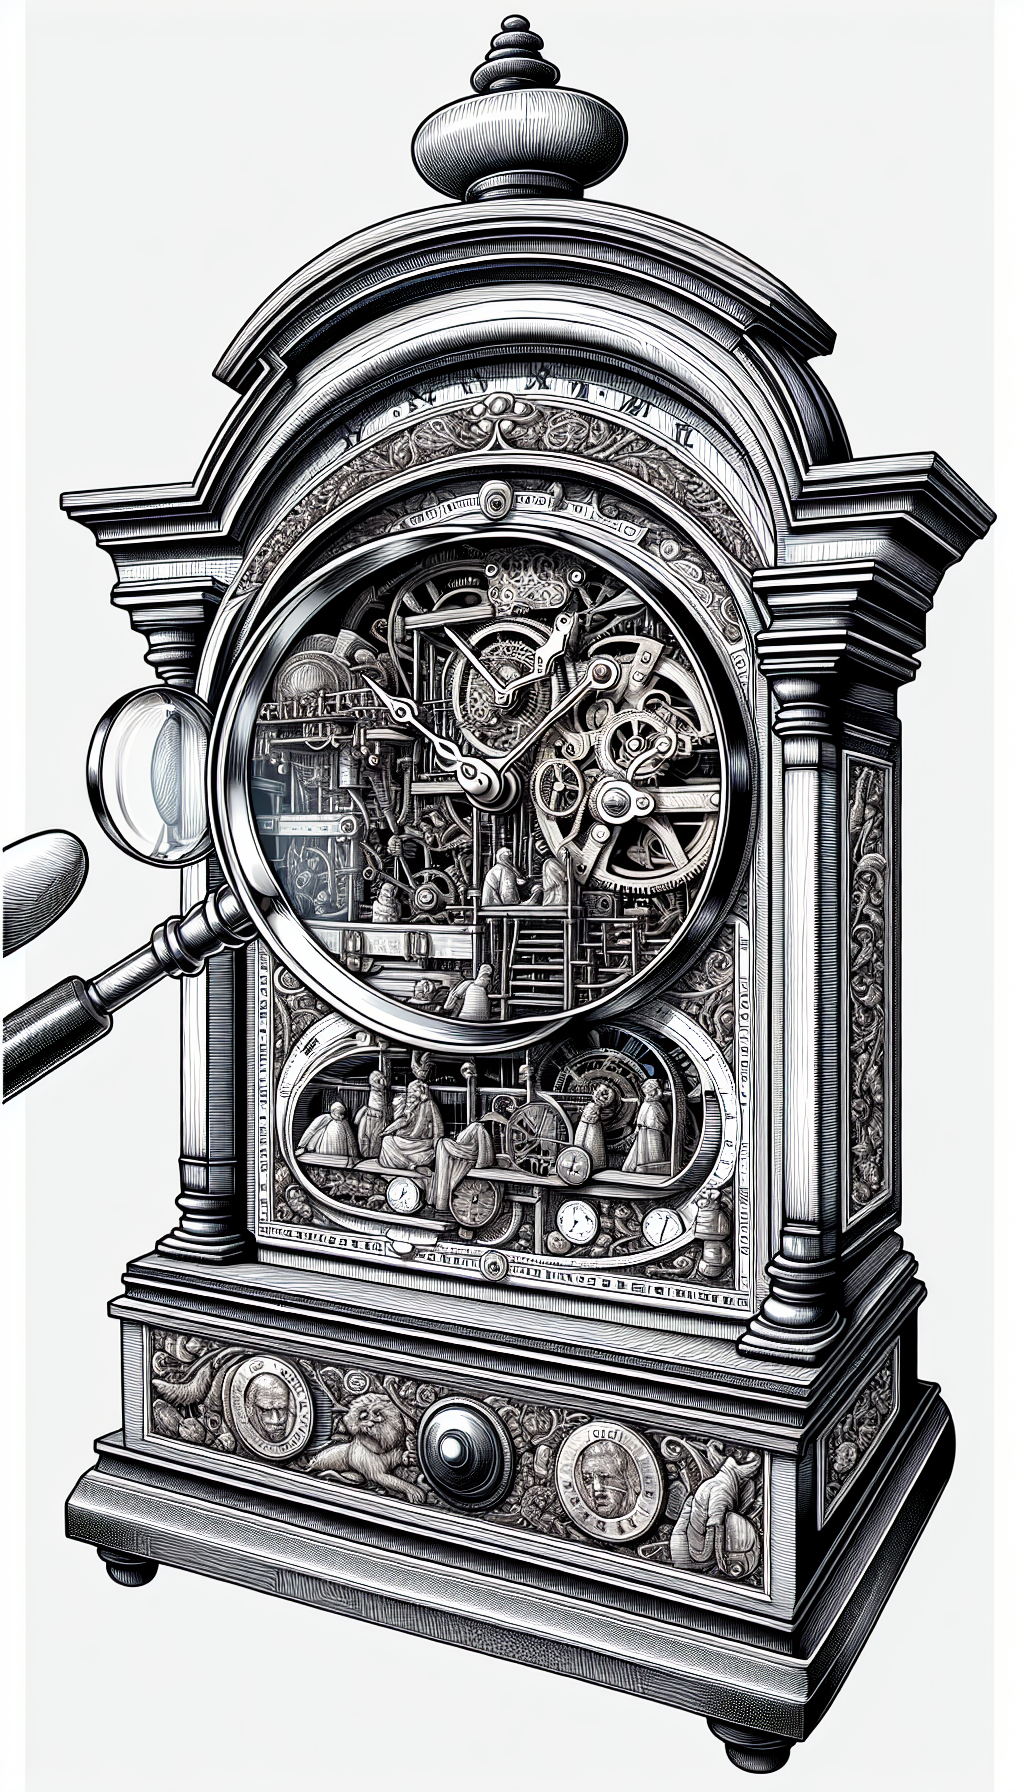 An intricate illustration shows a magnifying glass hovering over the face of a classic, ornately decorated mantel clock, unveiling hidden images within its workings: iconic historical events, famous historical figures, and rare coin symbols. The clock hands point to key moments in history, blending different illustration styles such as line art for the internal mechanism and realism for the revealed vignettes.